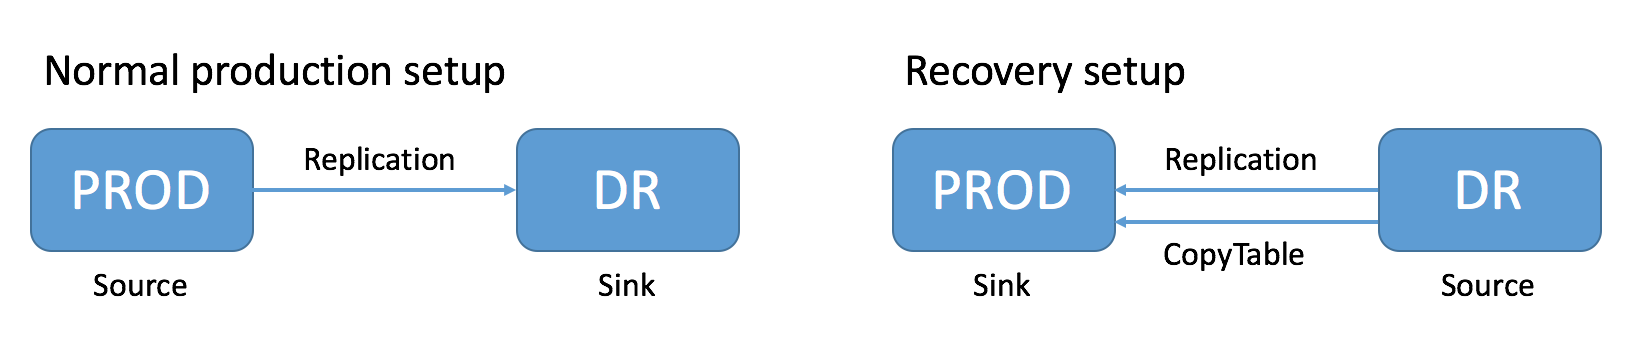 HBase replication roles in normal production versus disaster recovery